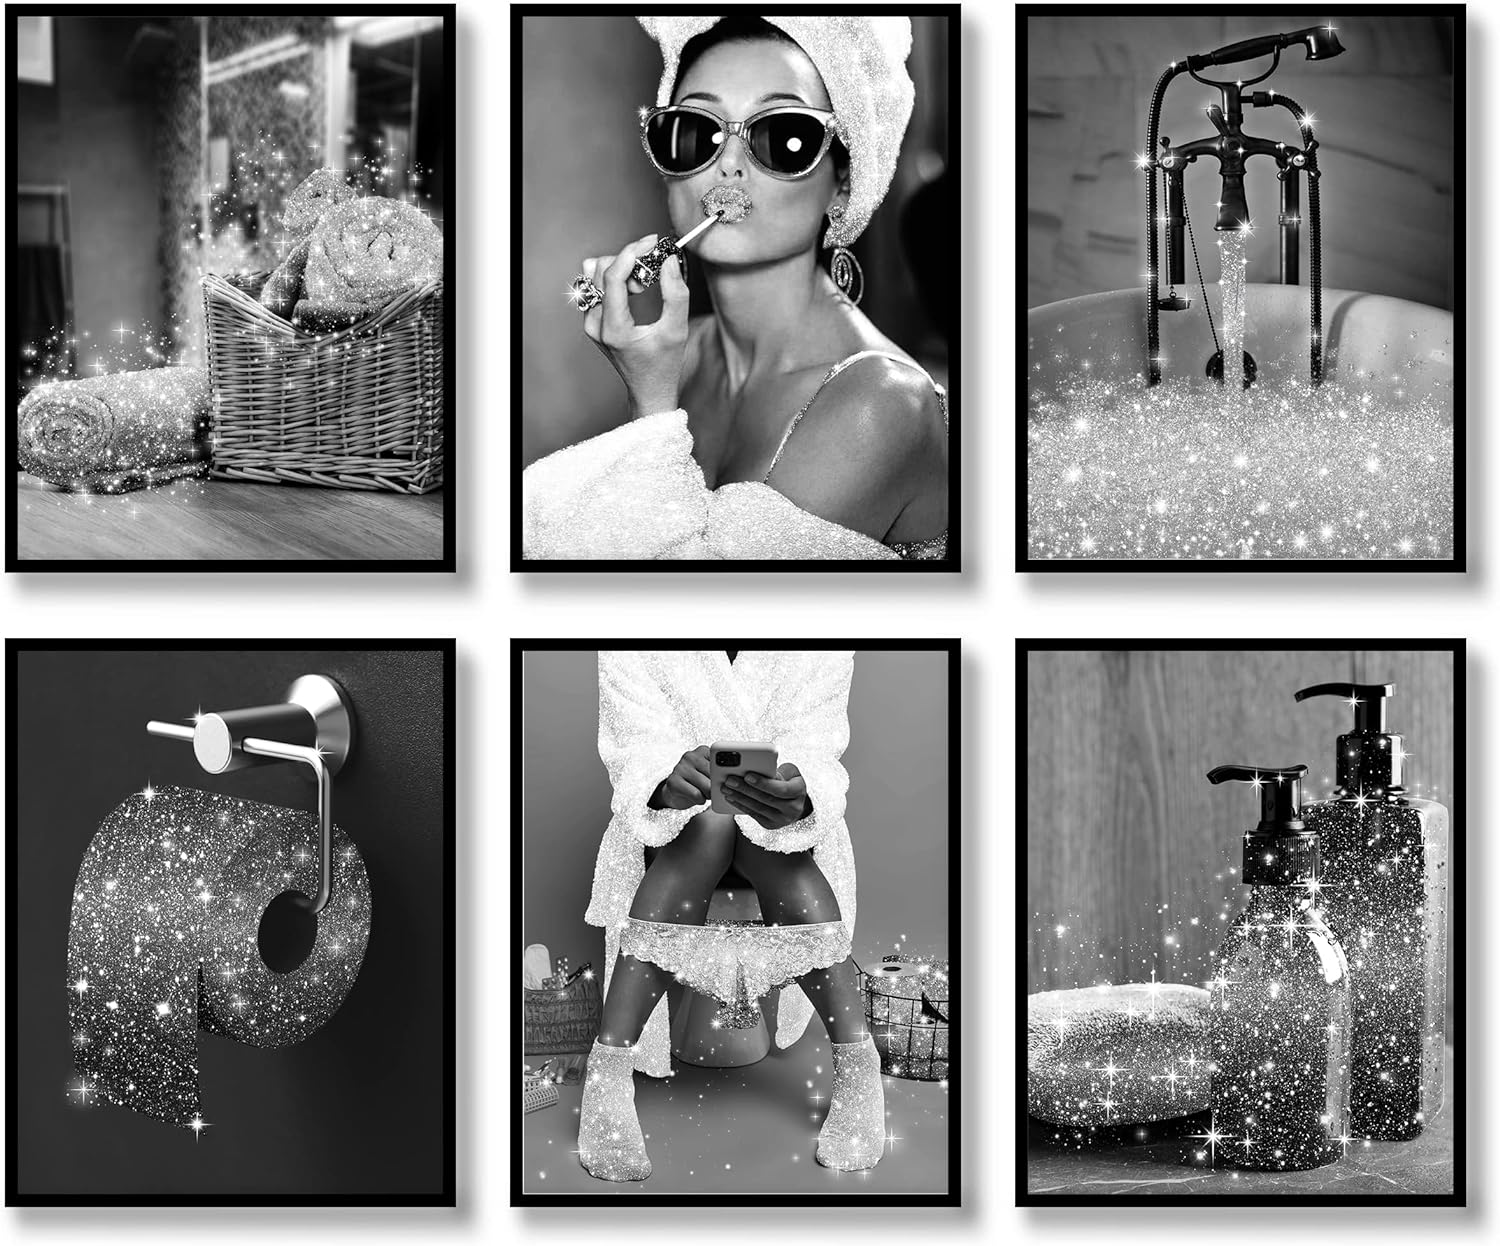 Set of 6 Black and White Glam Glitter Canvas Posters Pictures Photos Artwork Modern Women Funny (Black and White, 8